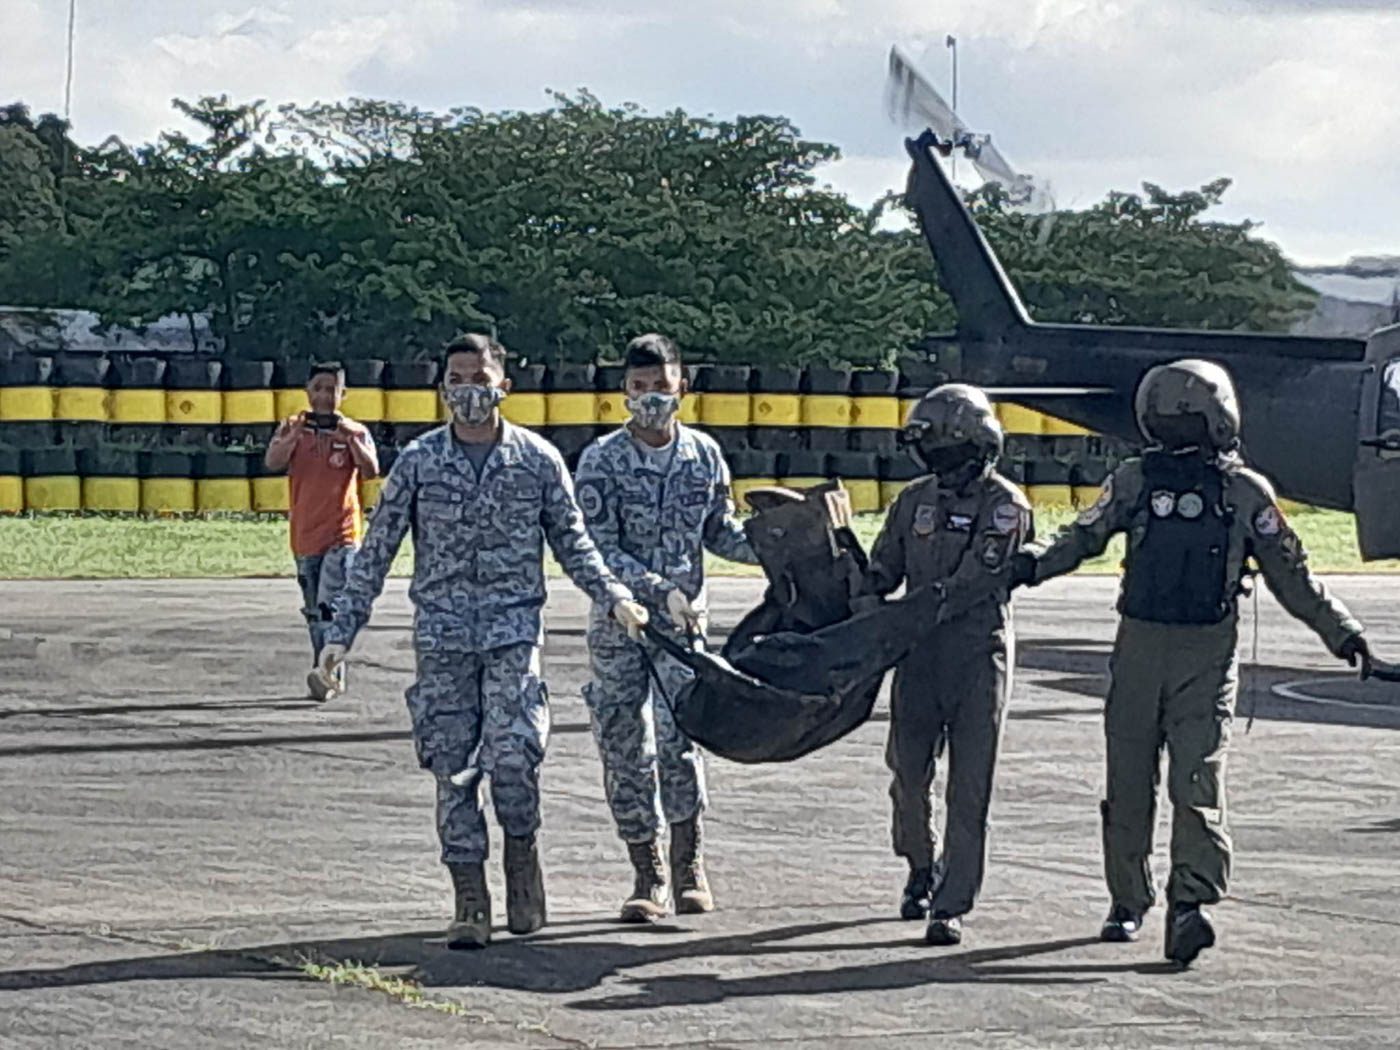 Bodies retrieved from crashed Cessna plane in Isabela